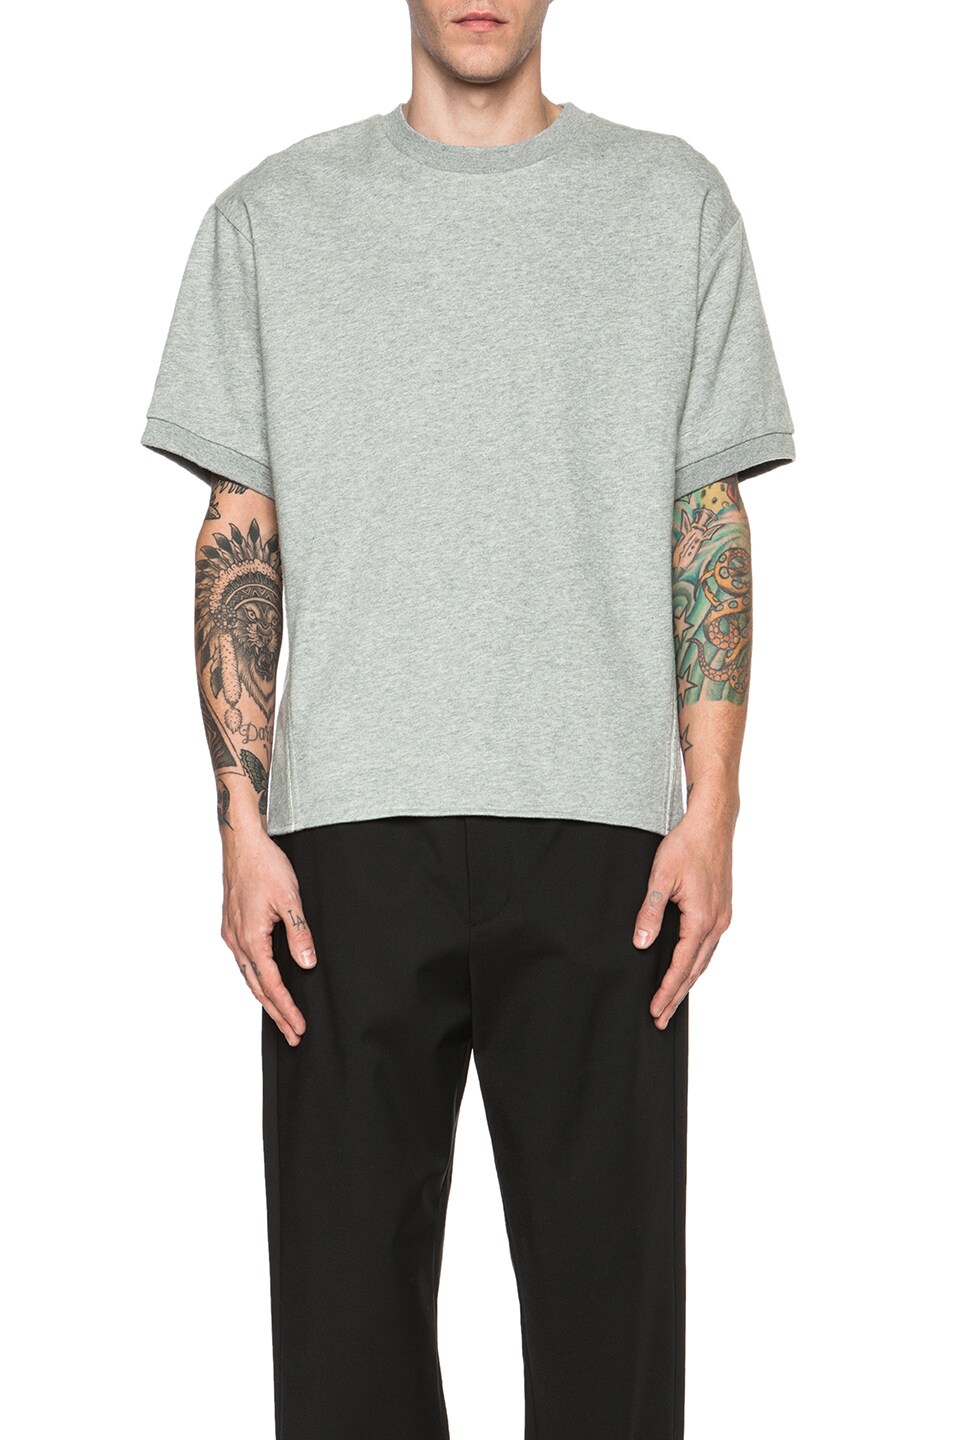 Image 1 of 3.1 phillip lim Cotton Pullover with Combo Panel in Grey Melange